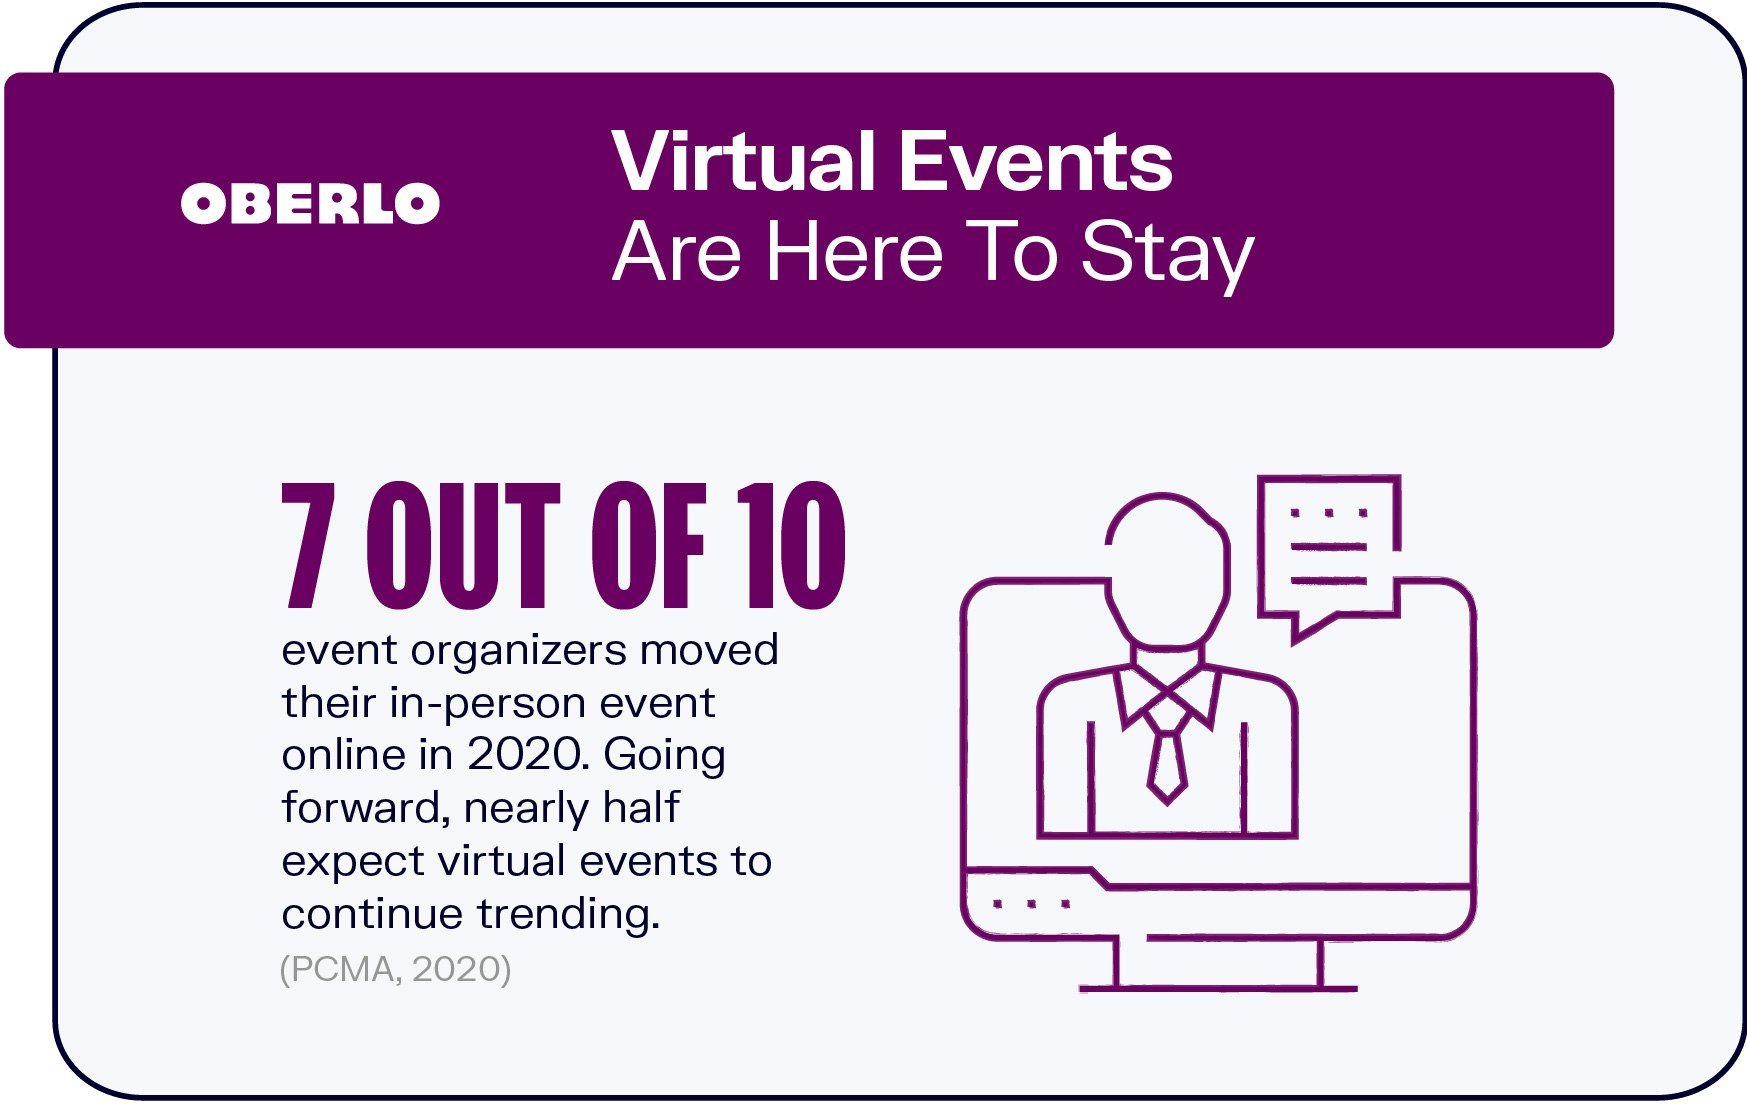 Virtual Events are here to stay